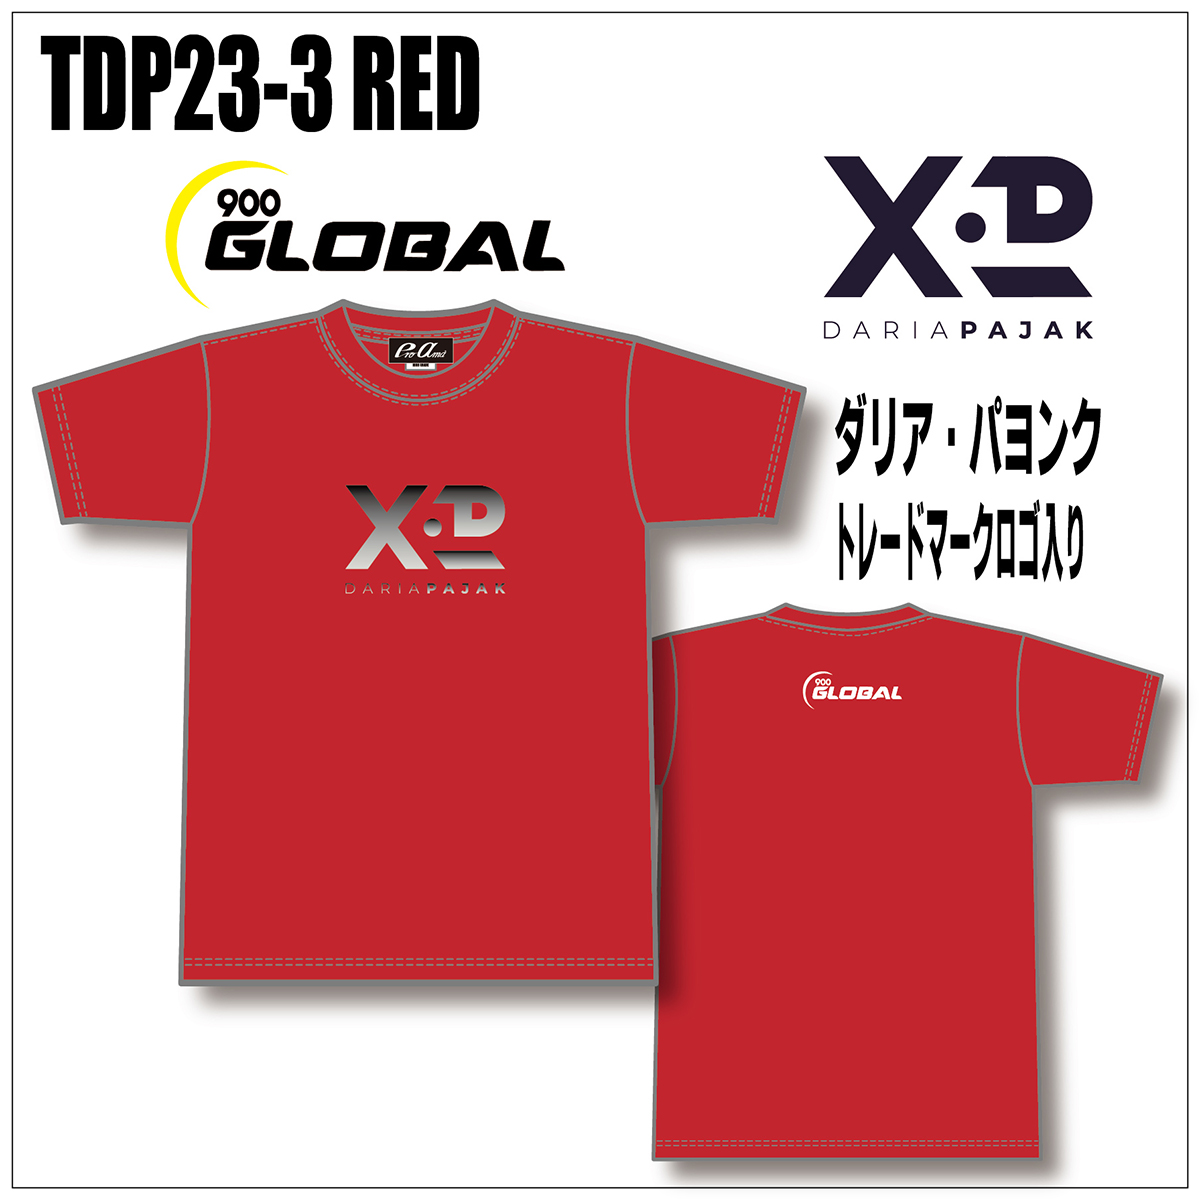 Tシャツ(TDP23-3 RED) [ABS(専用フォーム)] - 2,404円 : ボウリング 